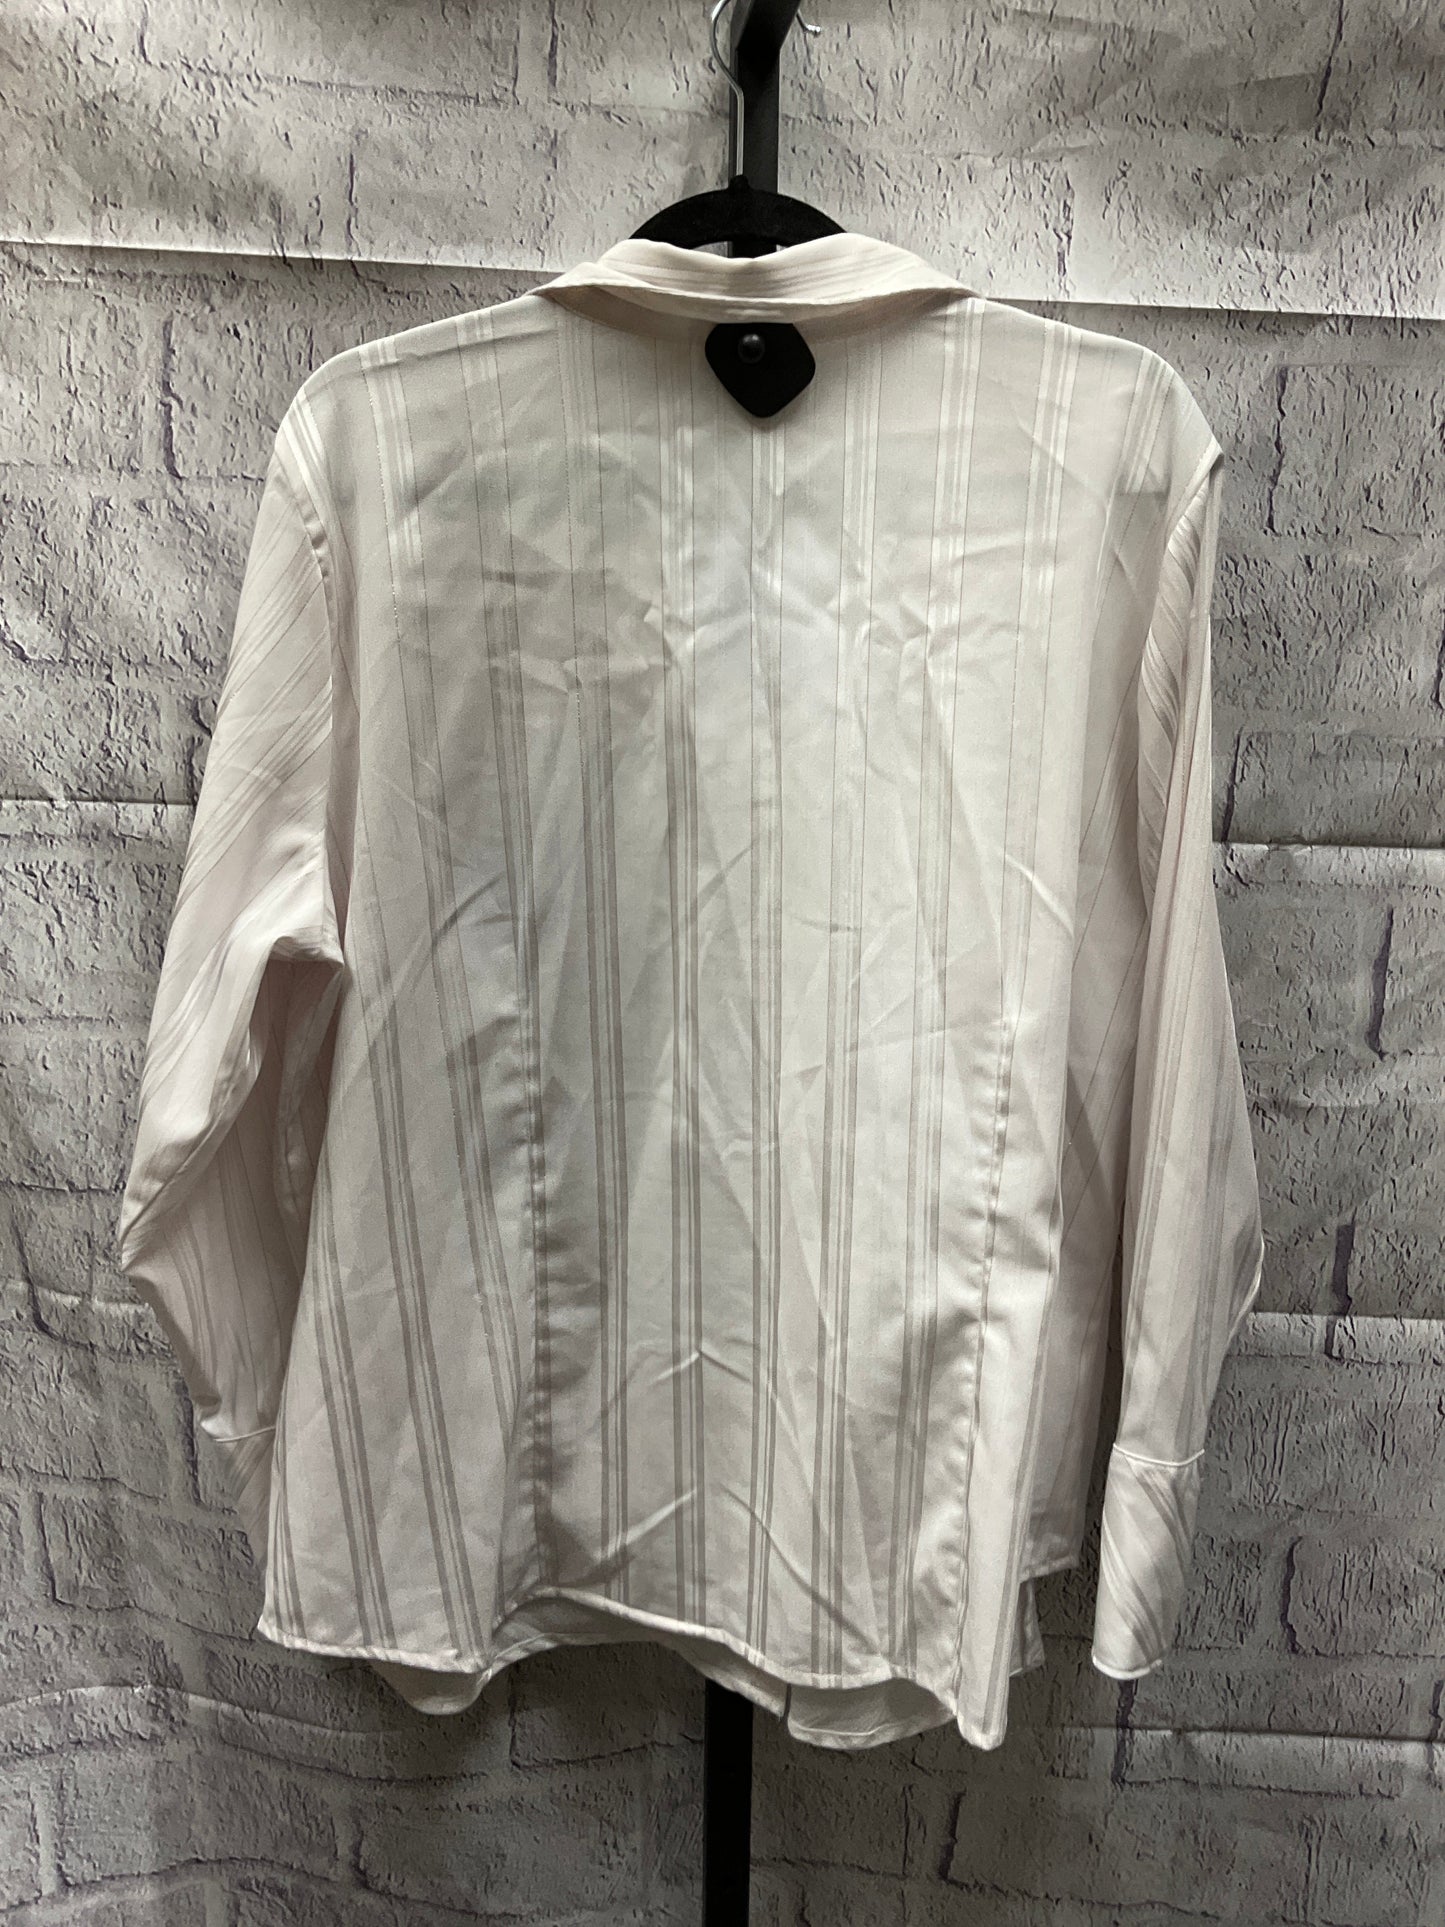 Top Long Sleeve By Worthington  Size: 1x